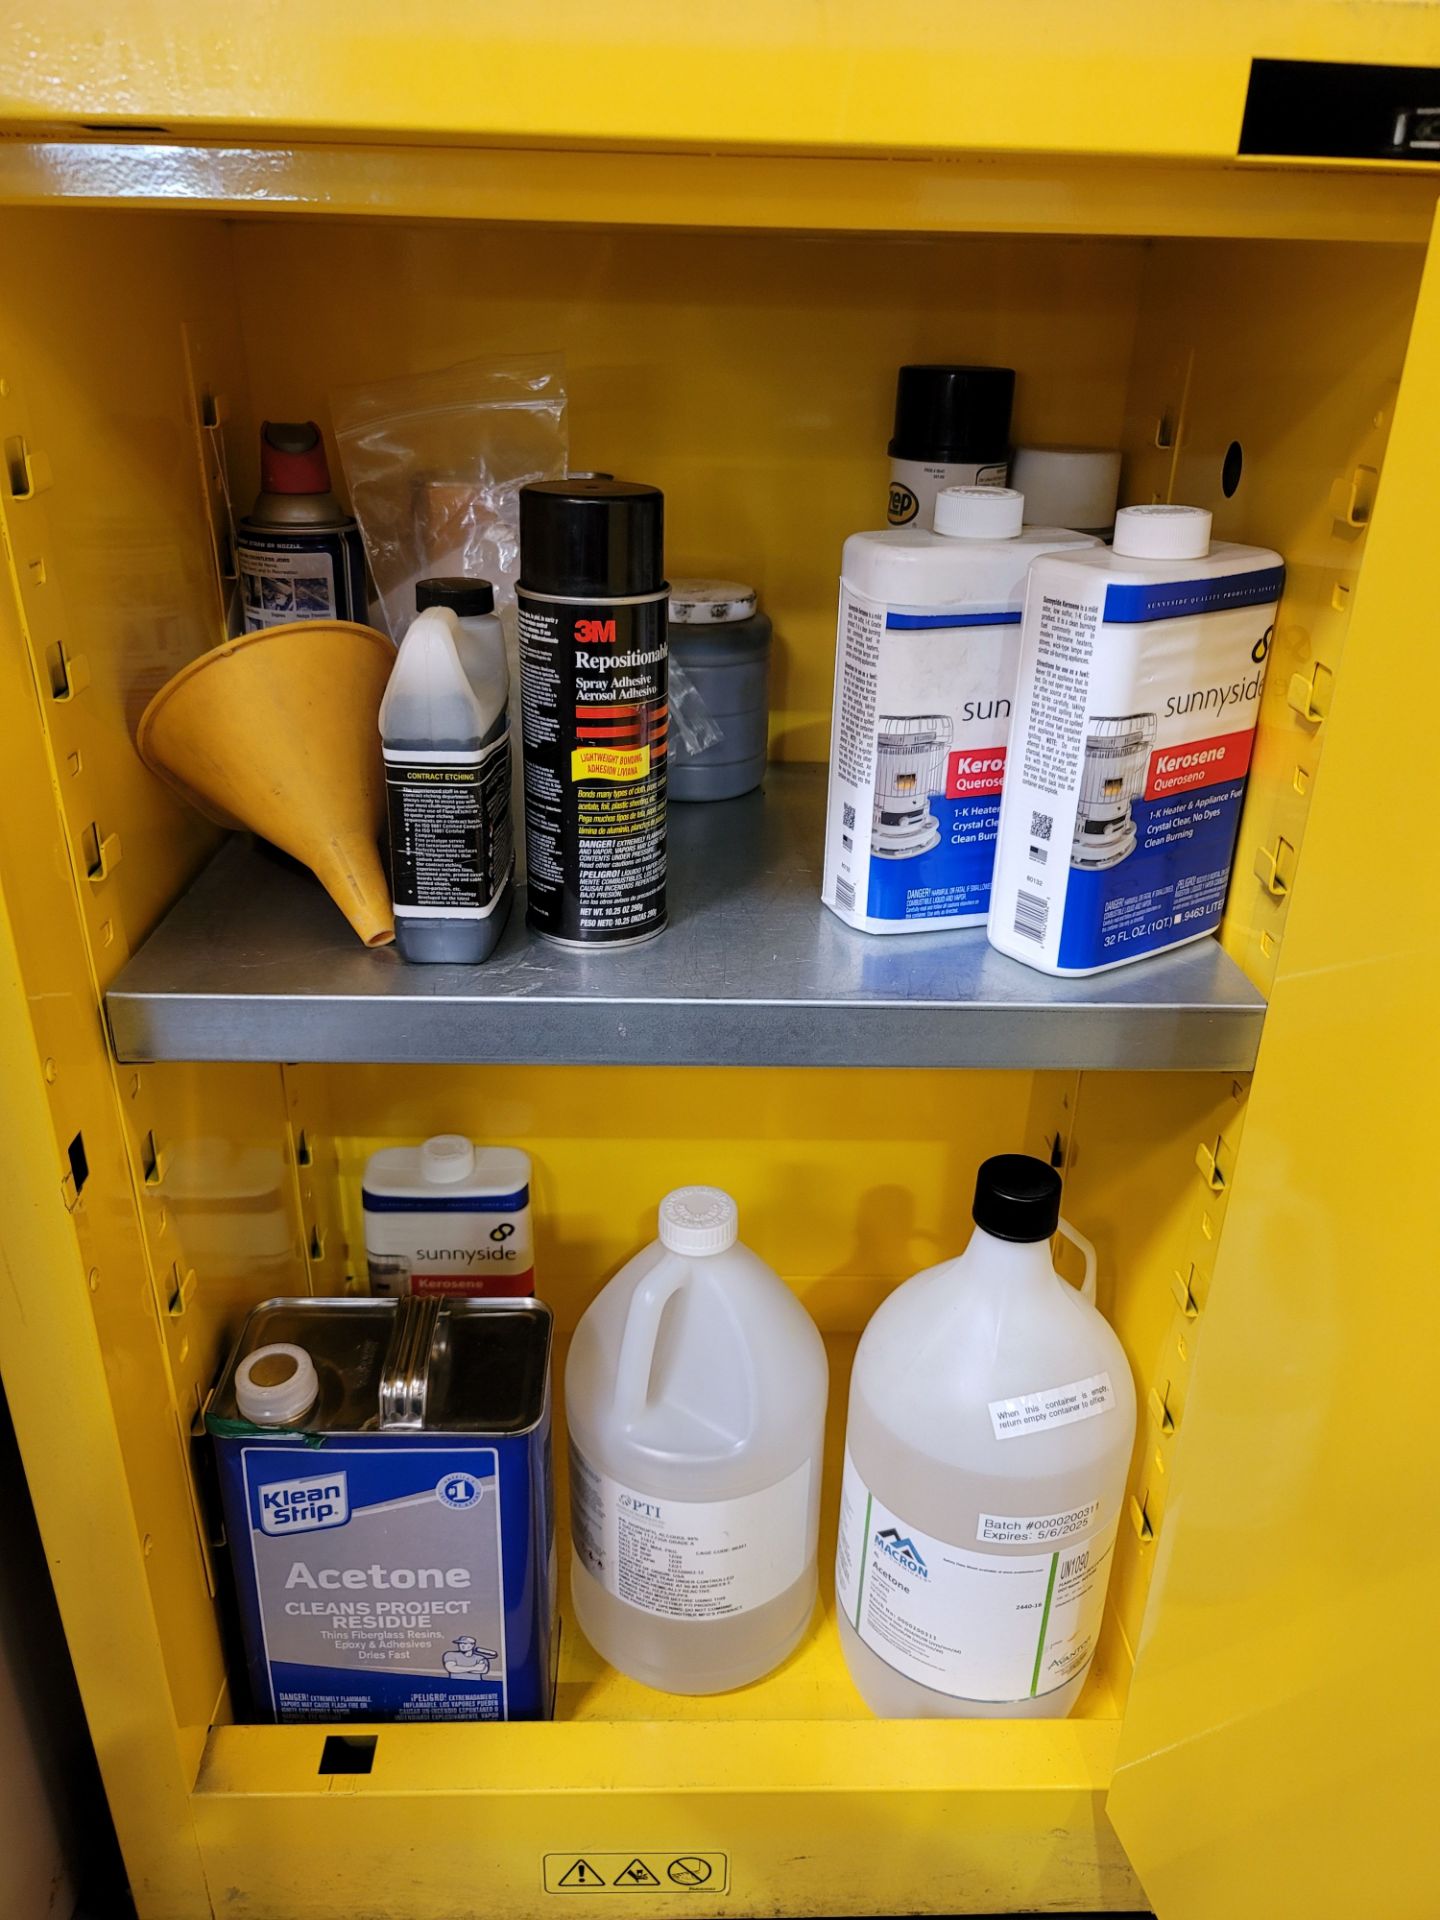 JUSTRITE FLAMMABLE LIQUID STORAGE CABINET, 12-GALLON CAPACITY, WITH OR WITHOUT CONTENTS - Image 2 of 3